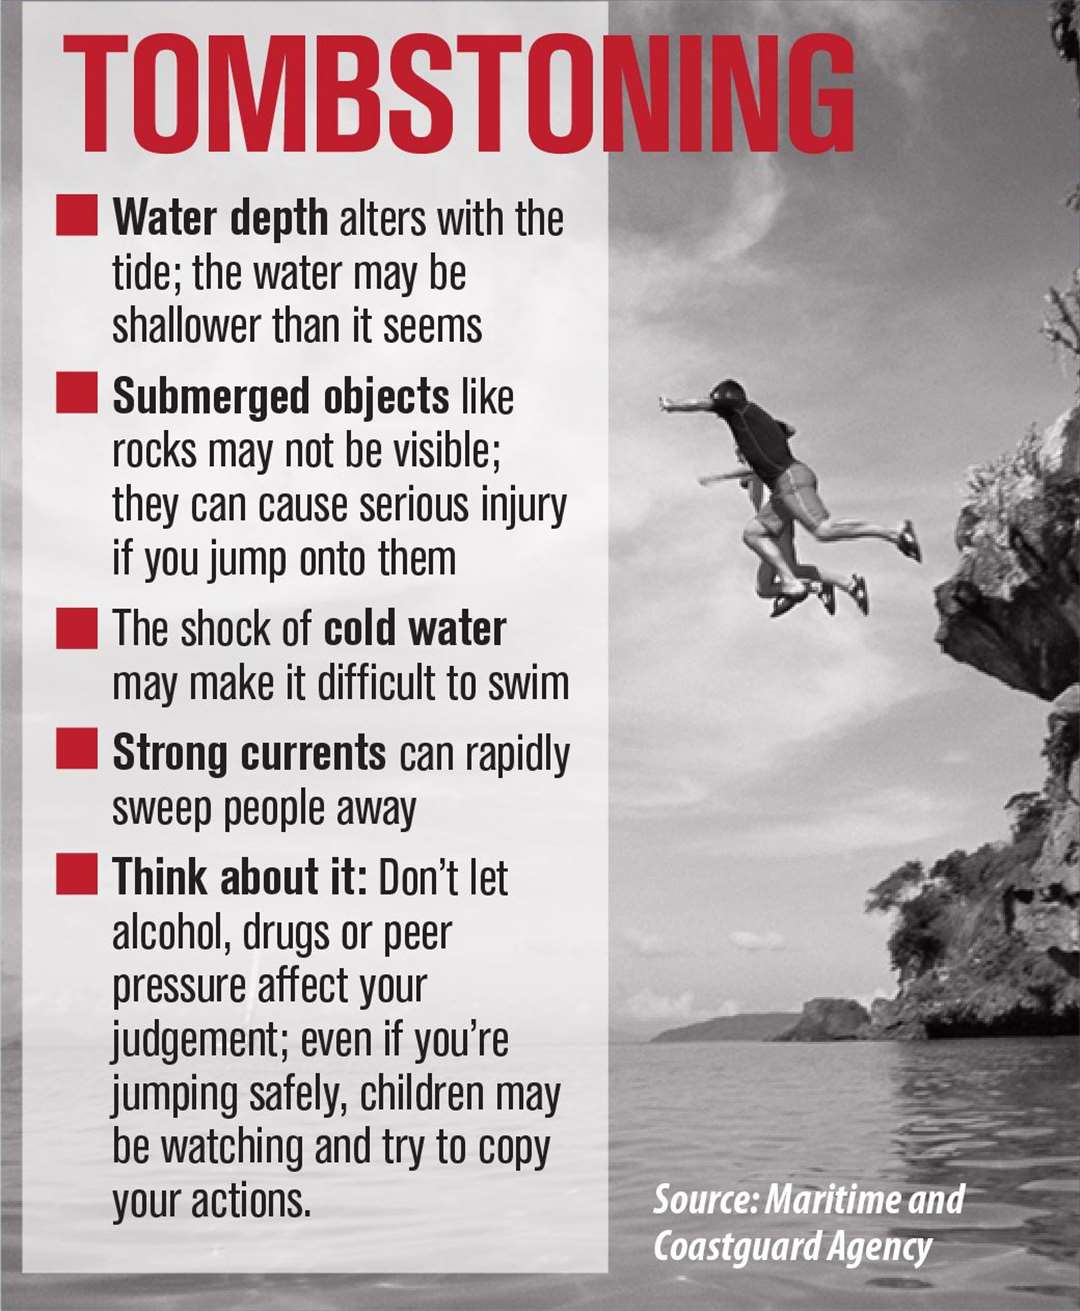 The Tombstoning warning issued by the coastguard